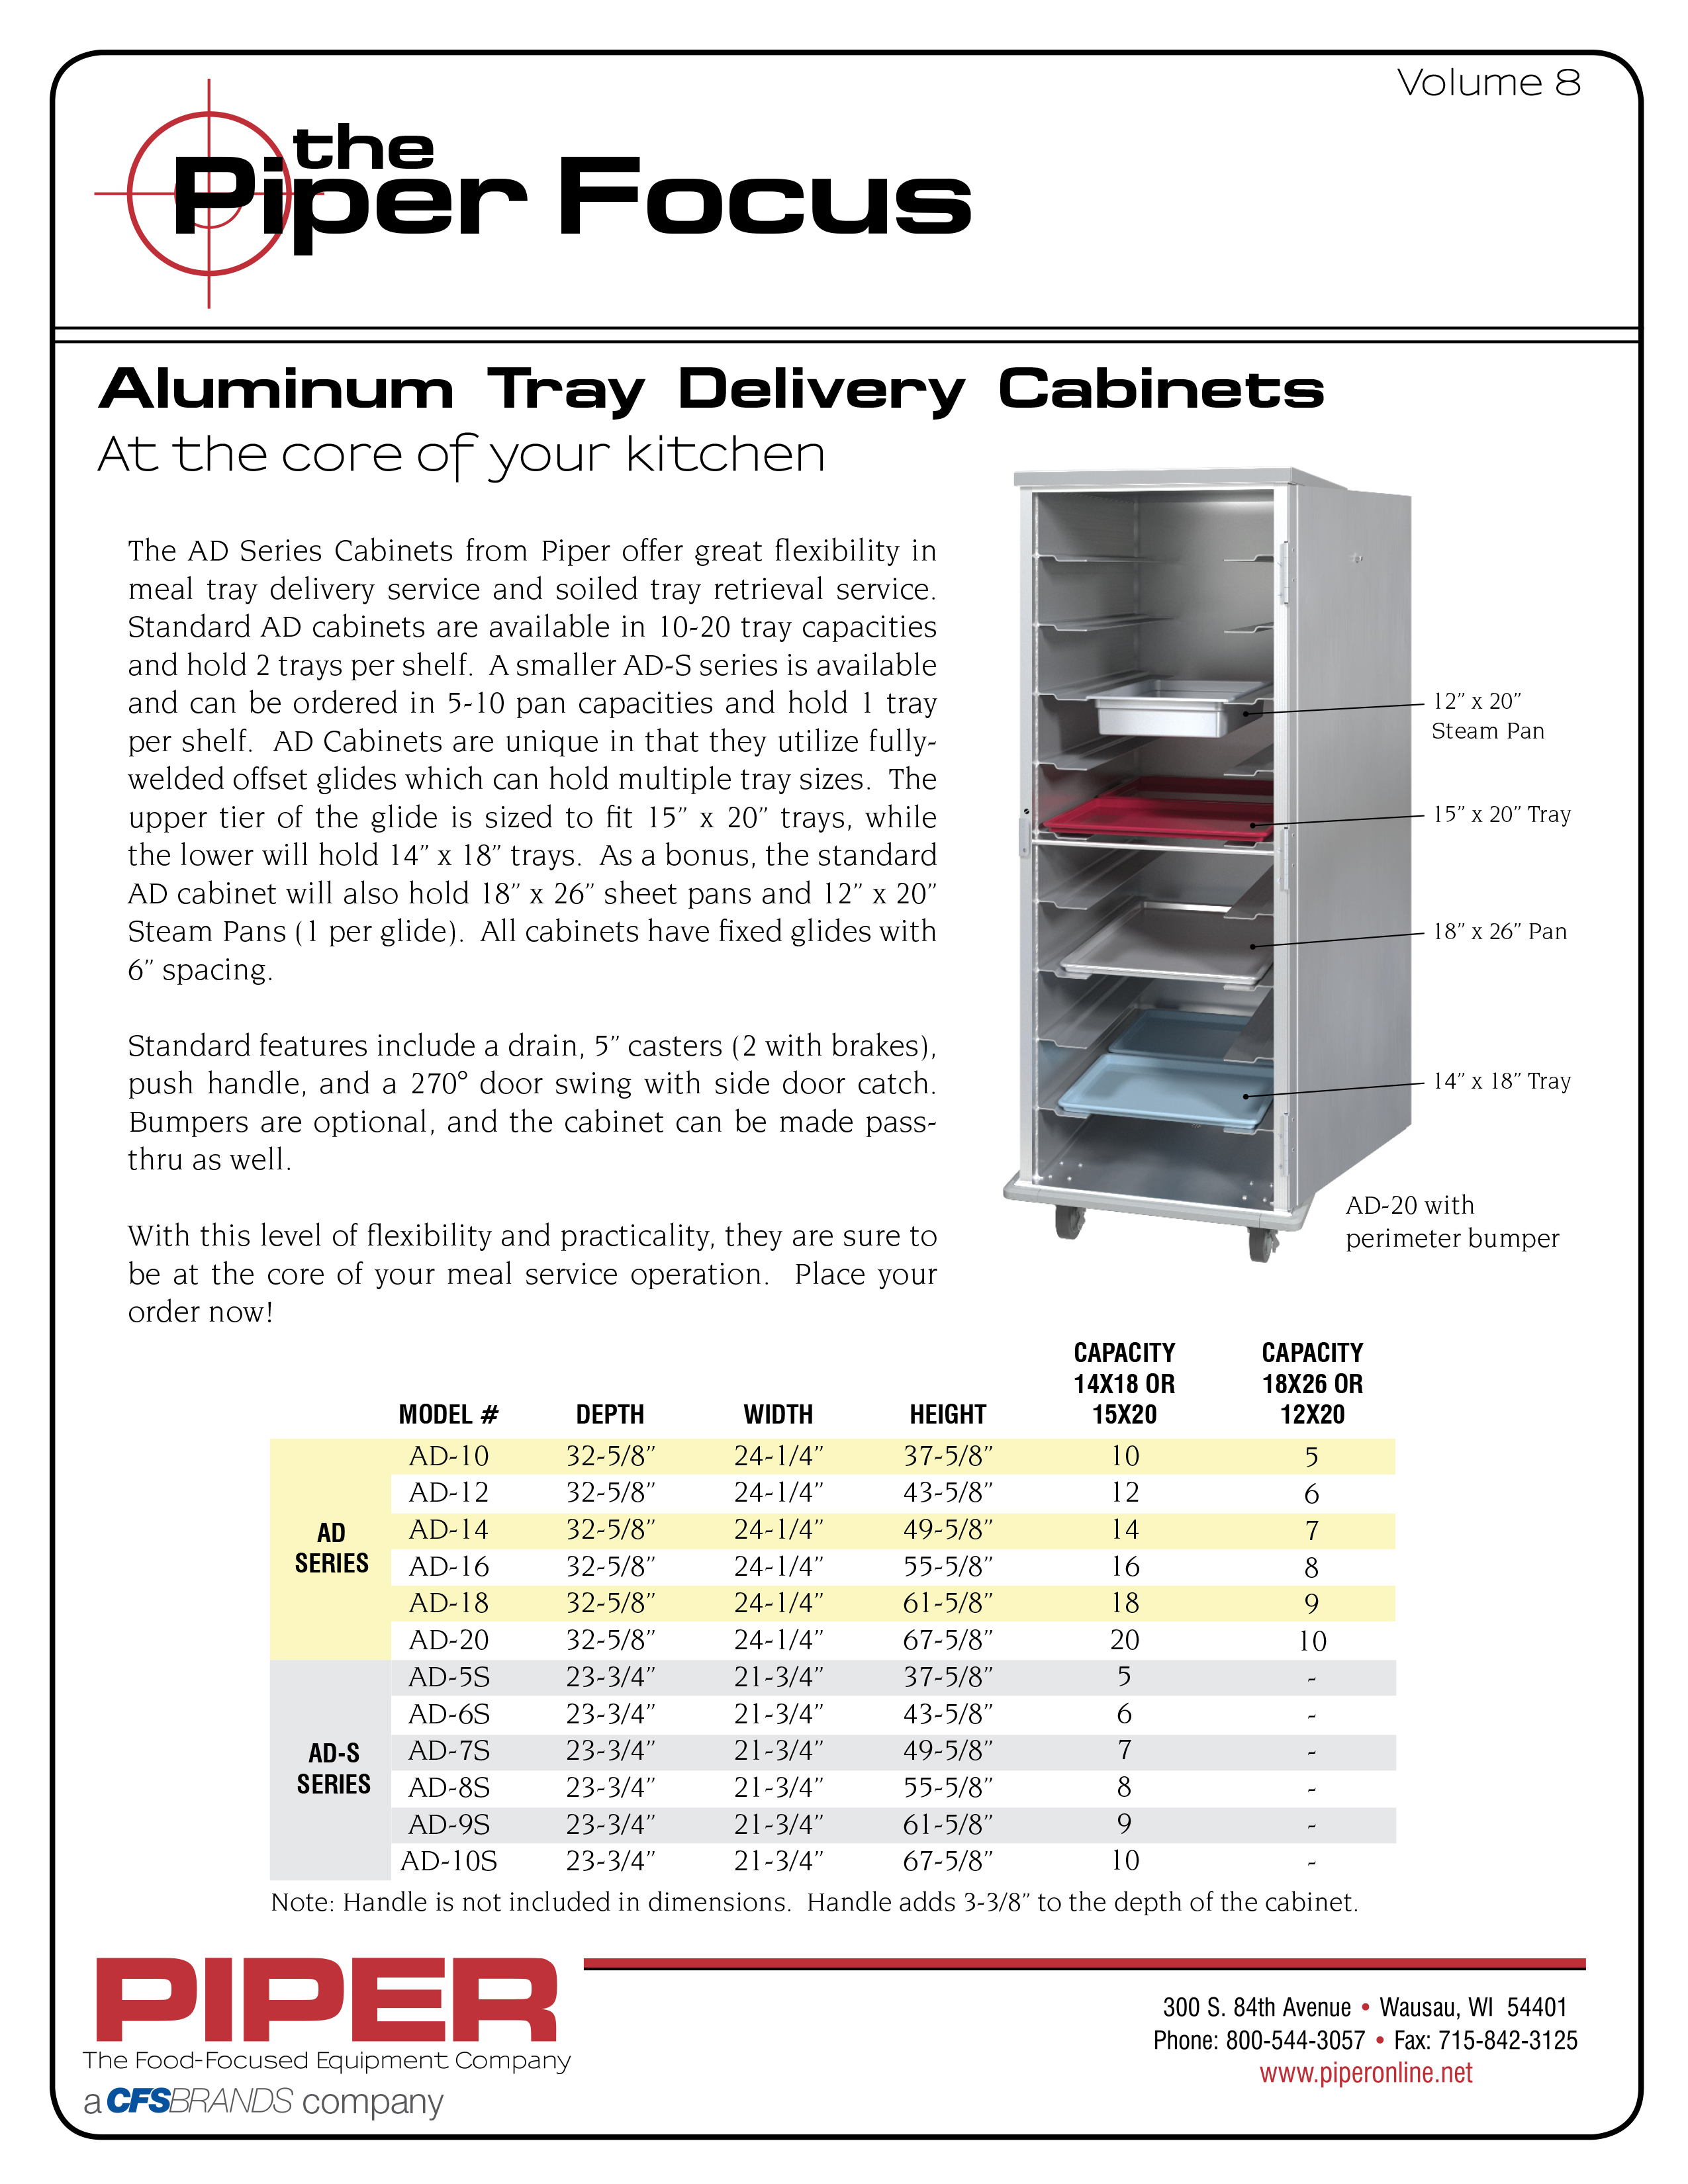 Piper Focus - Aluminum Tray Delivery Cabinets